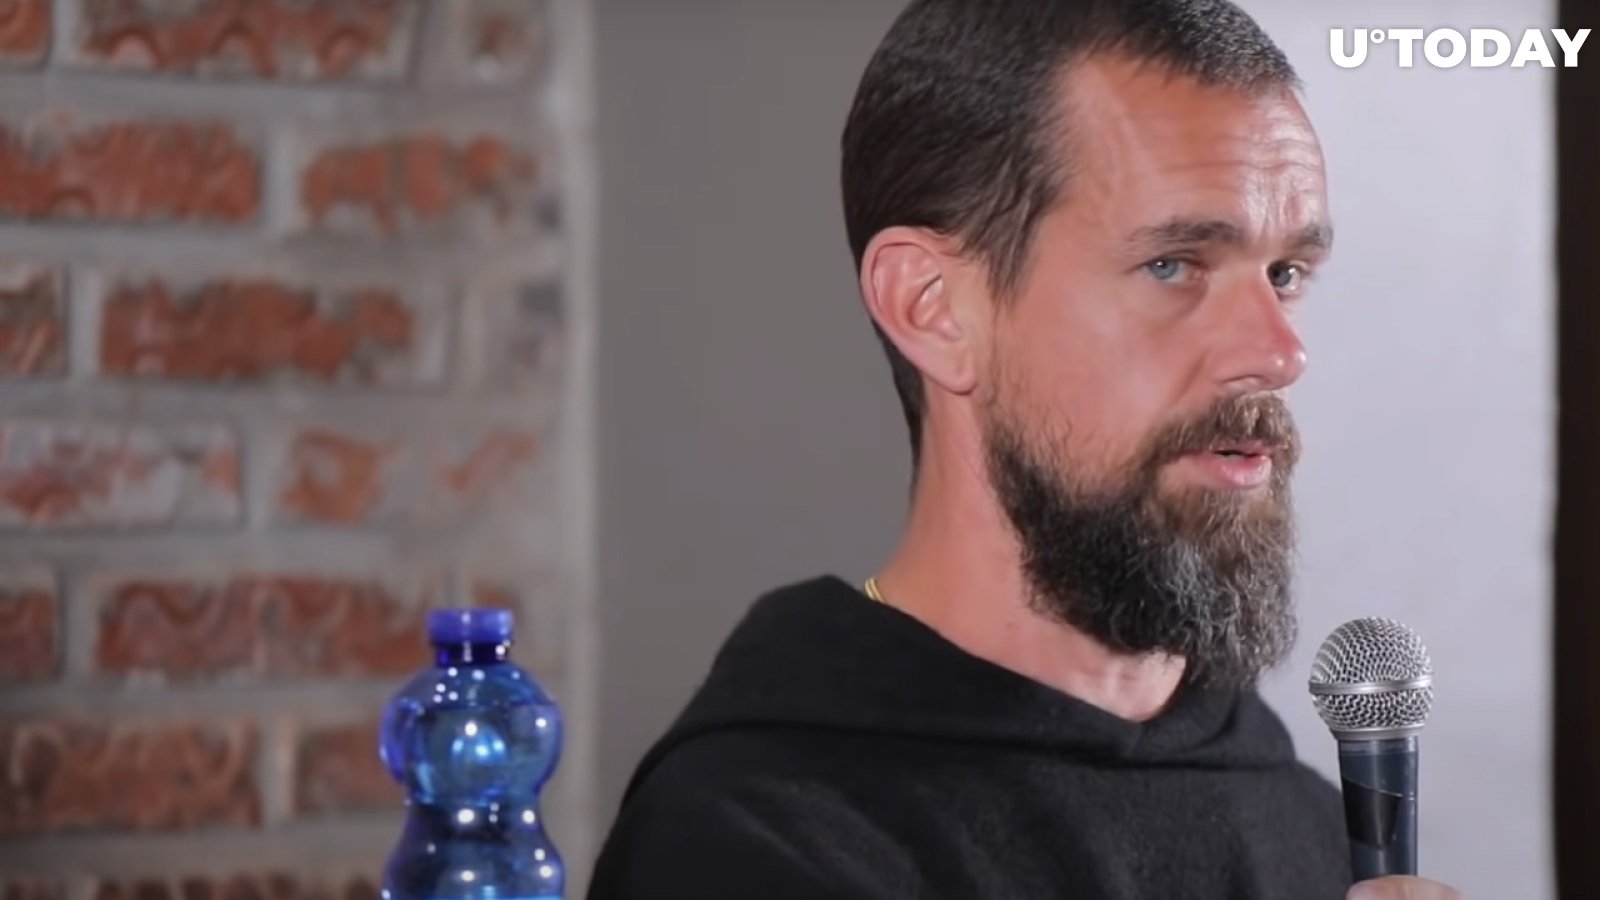 Jack Dorsey Adds "Bitcoin" to His Twitter Bio Section – Is He up to Something?